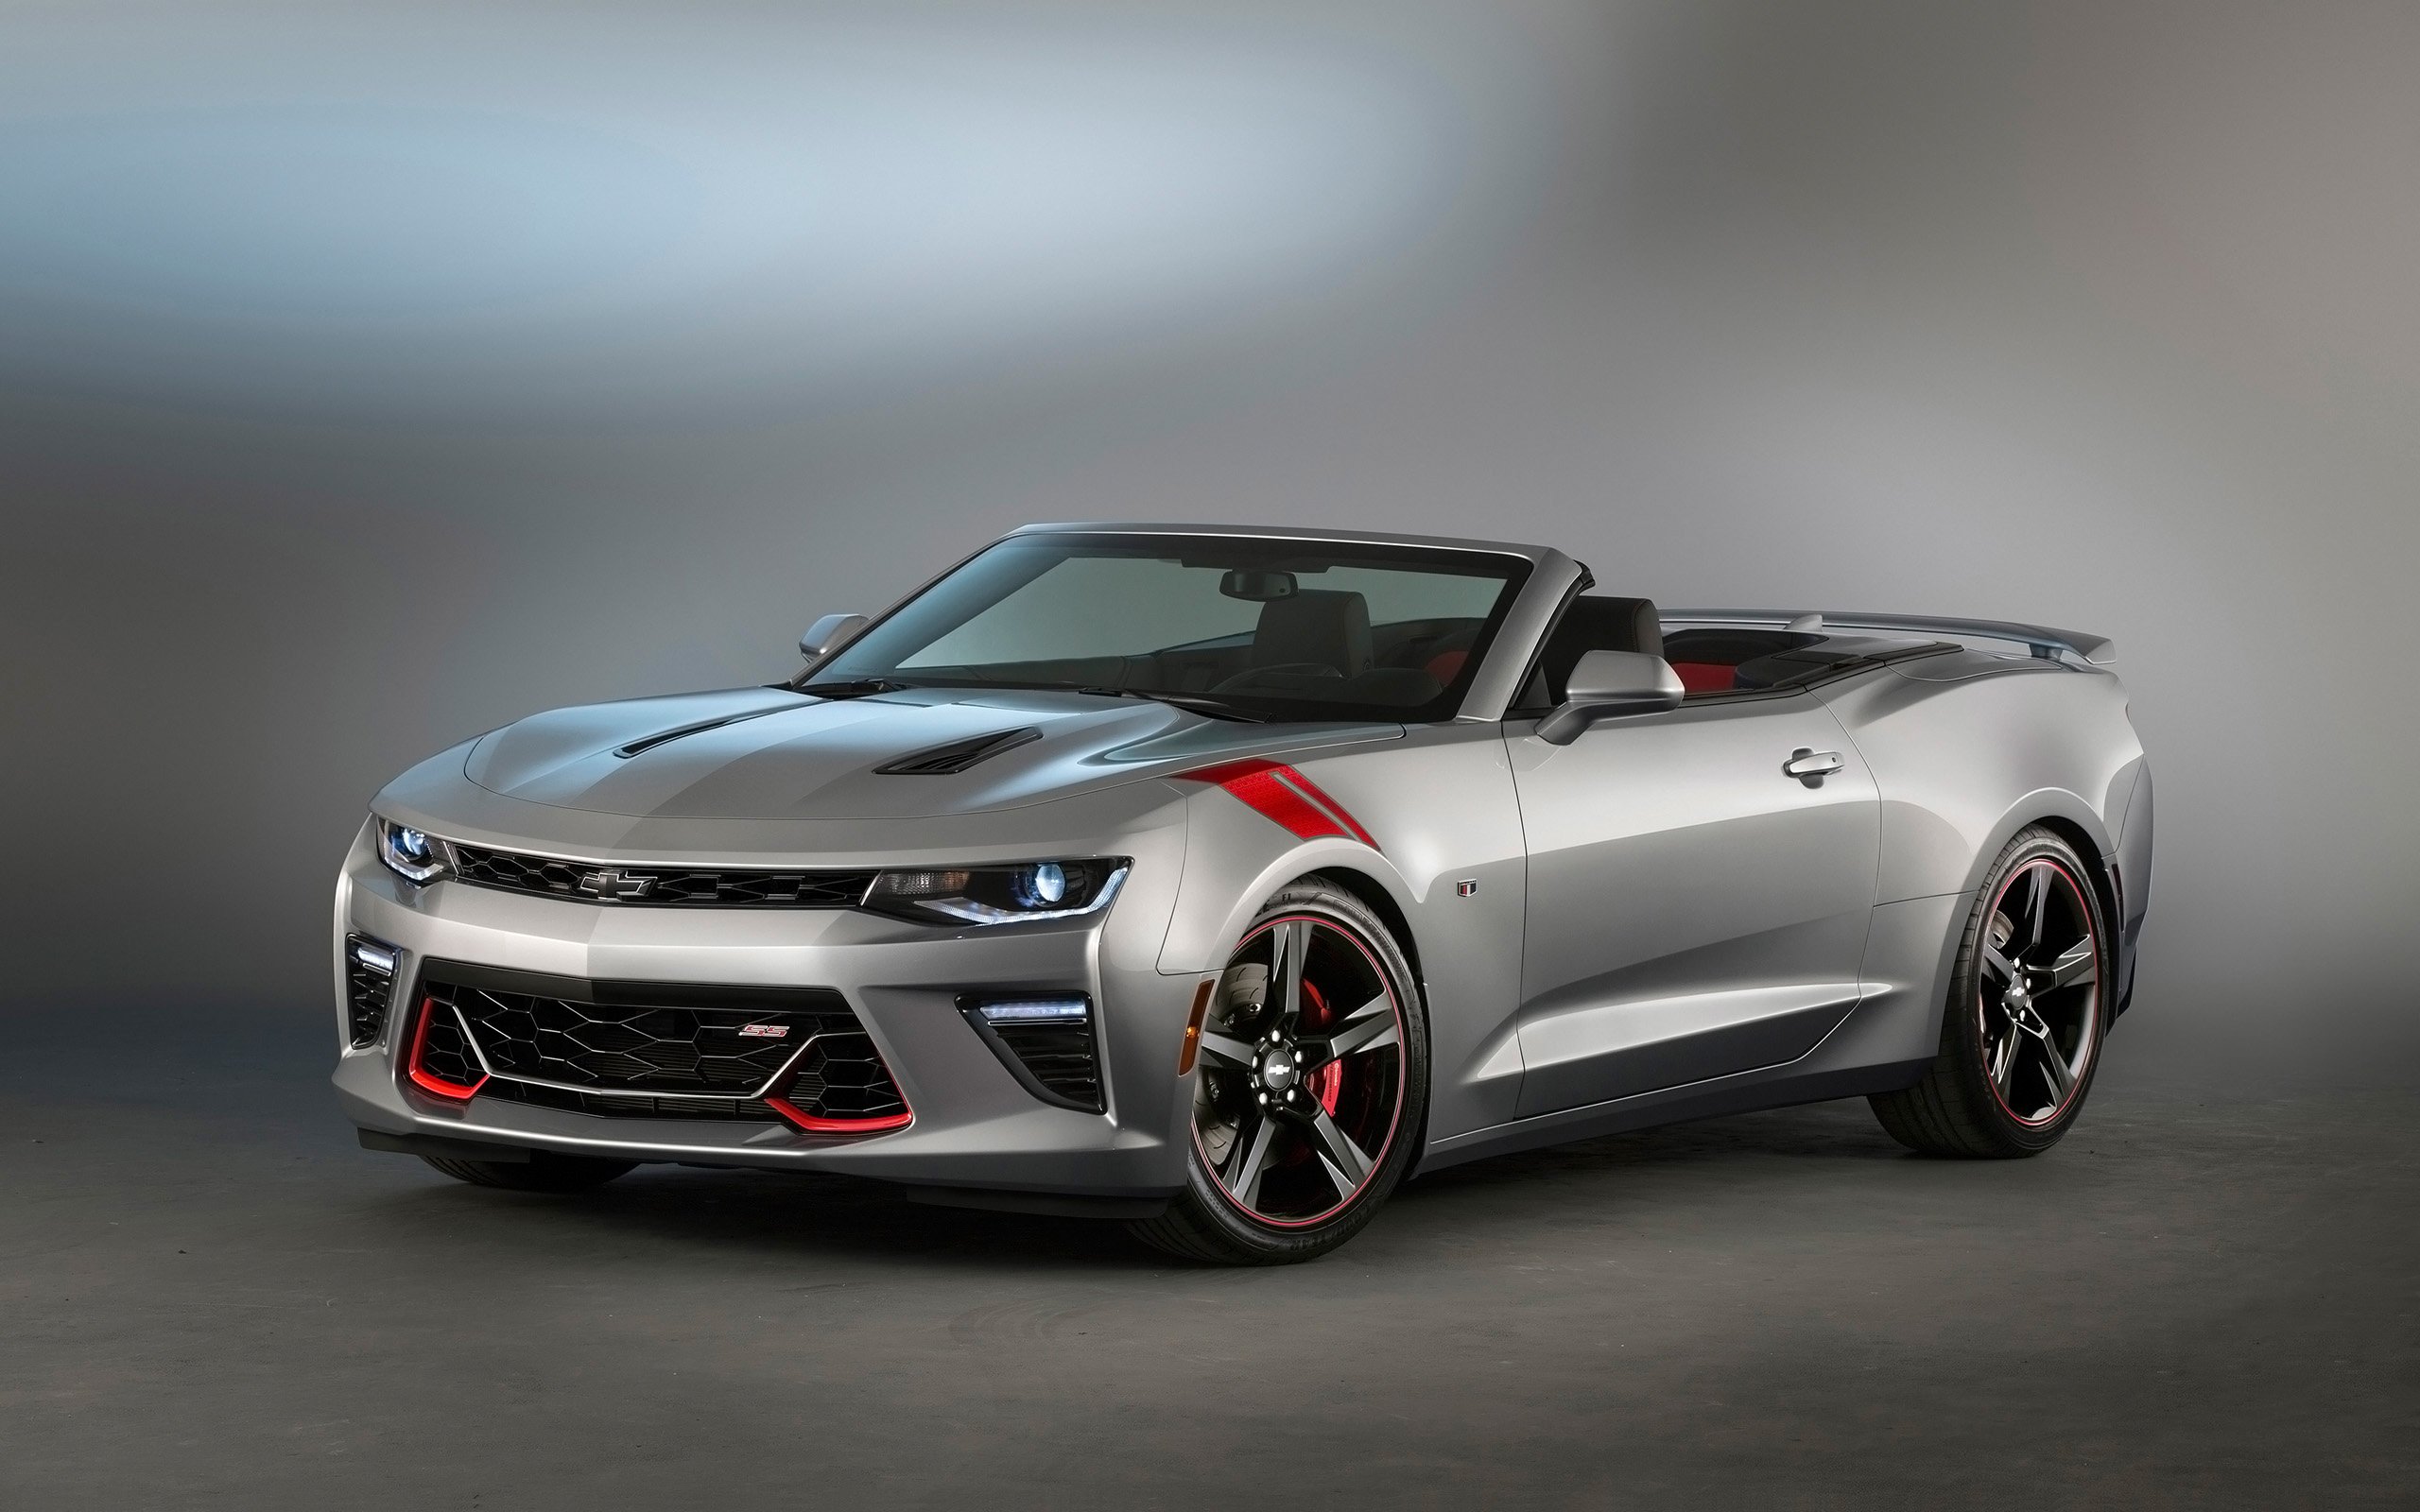 2016, Chevrolet, Camaro, S s, Accent, Concept, Muscle, Tuning Wallpaper